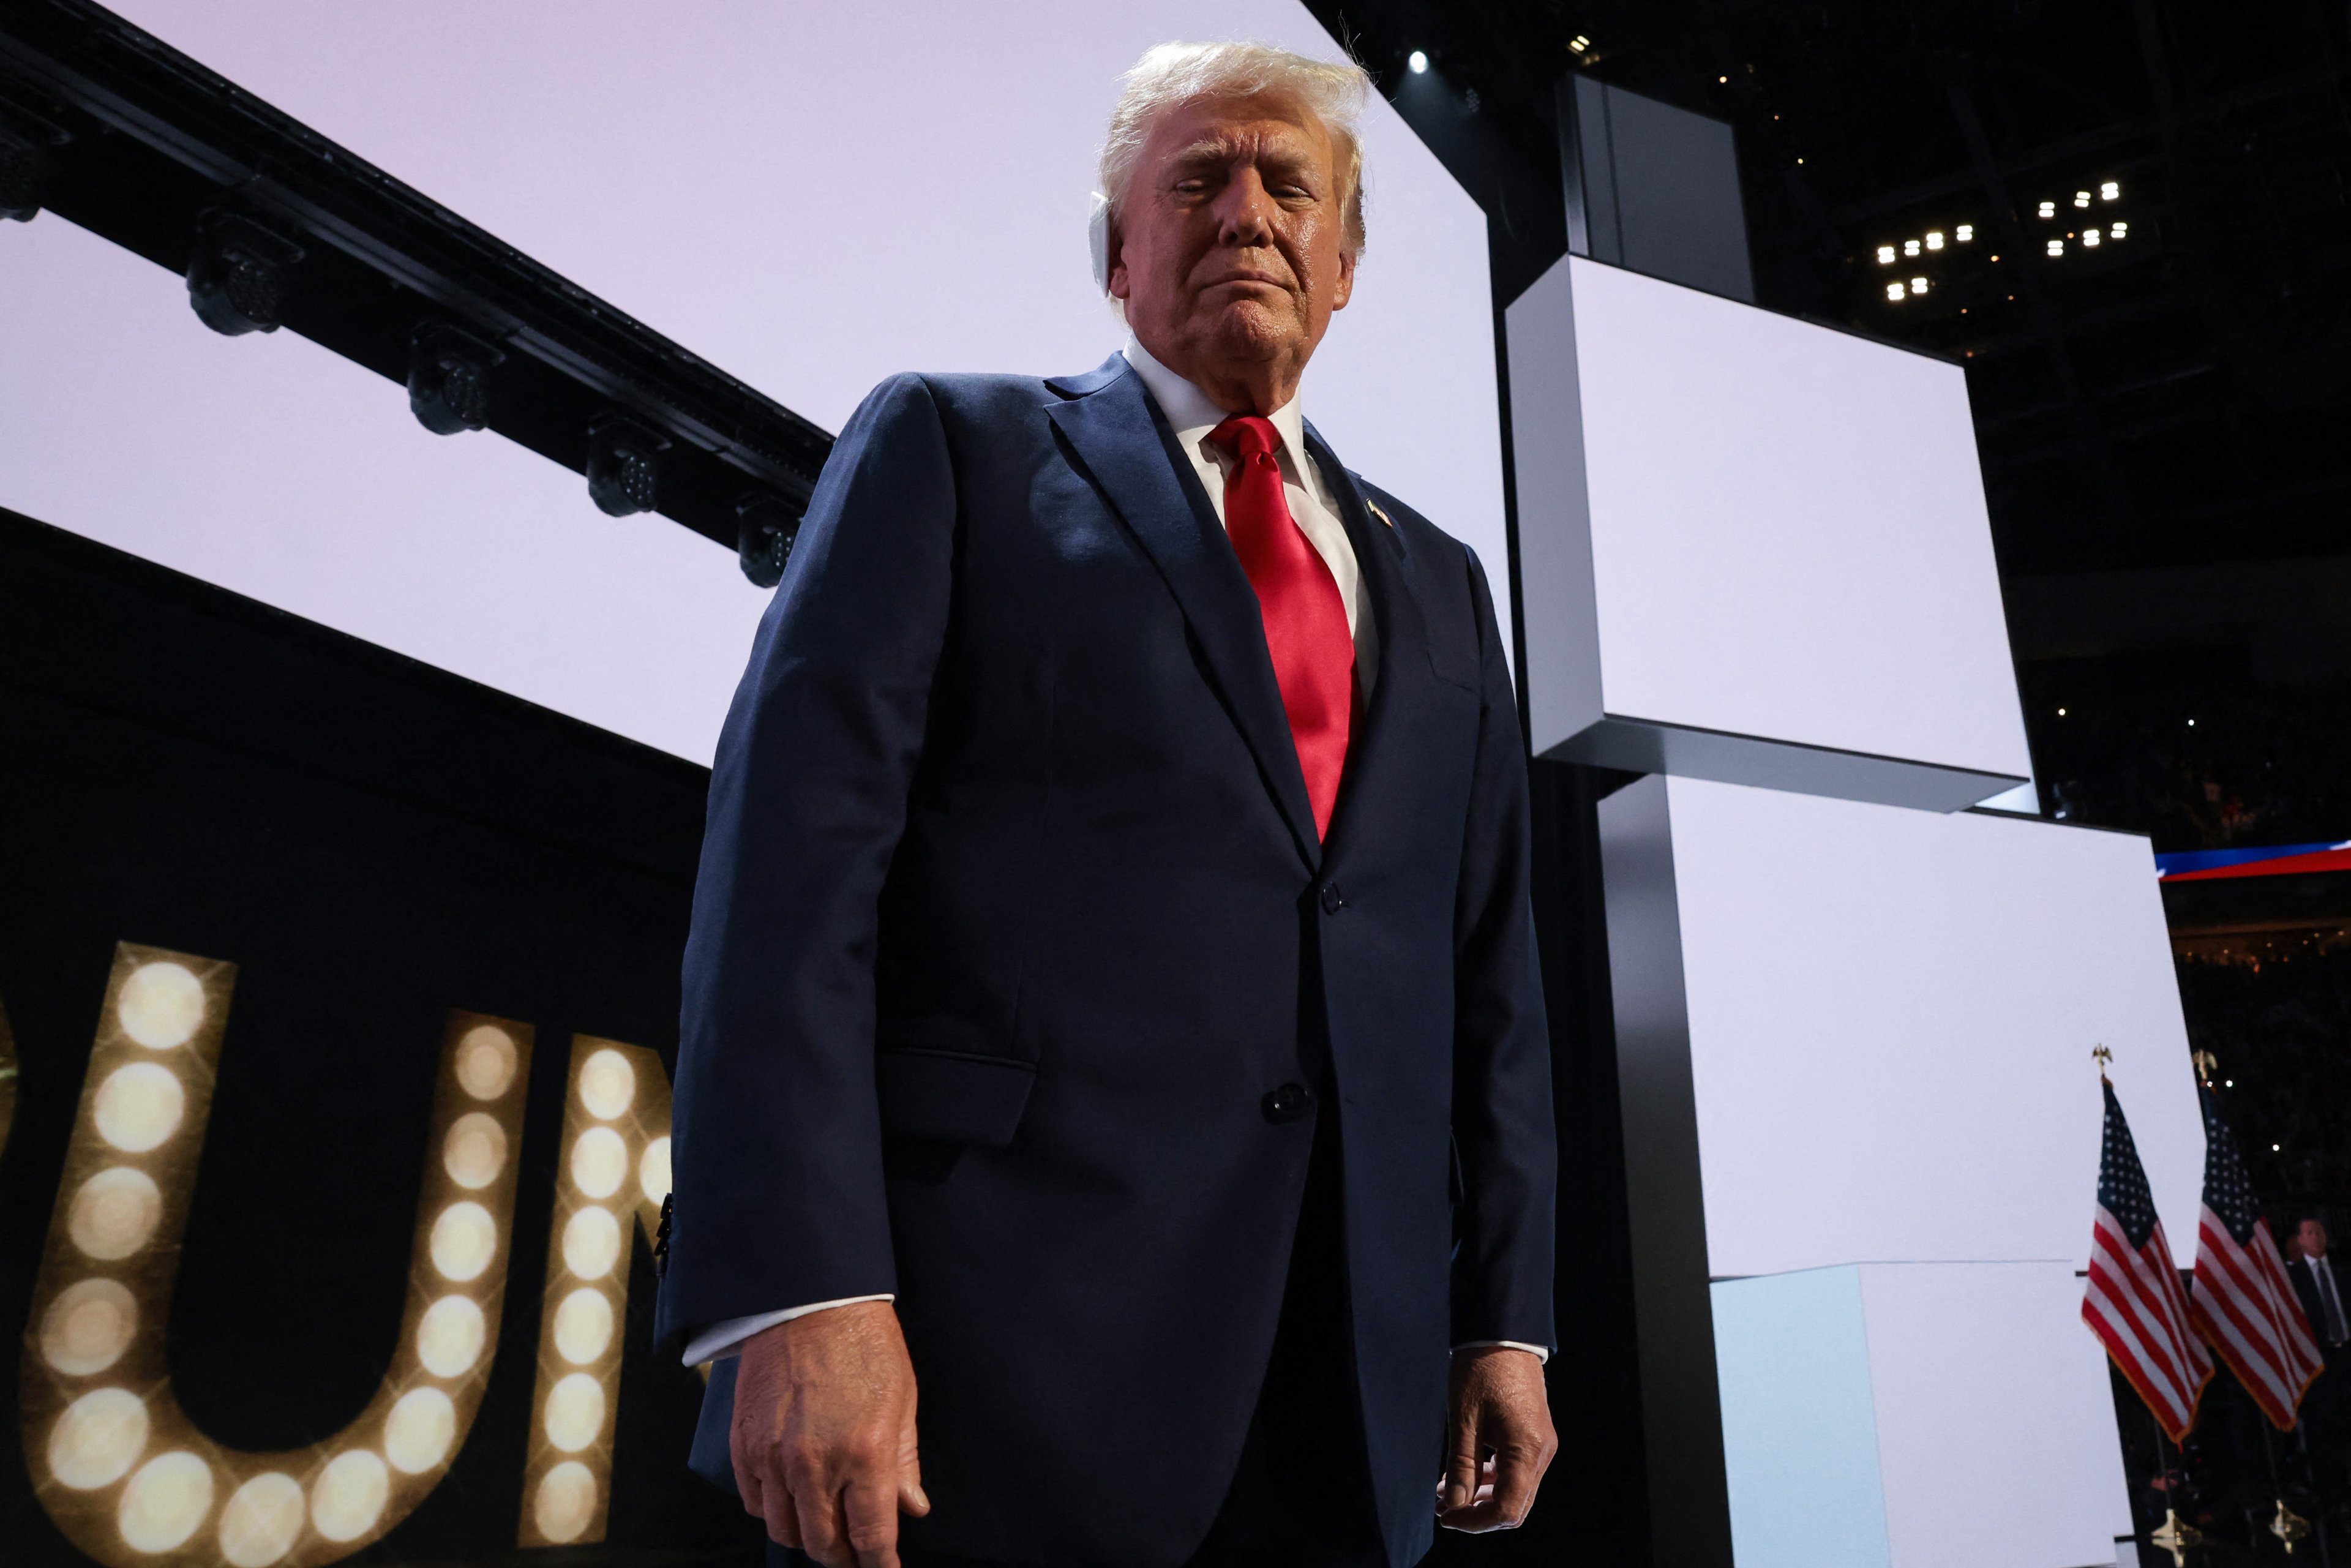 MILWAUKEE, WISCONSIN - JULY 18: Republican presidential nominee, former U.S. President Donald Trump walks on stage on the fourth day of the Republican National Convention at the Fiserv Forum on July 18, 2024 in Milwaukee, Wisconsin. Delegates, politicians, and the Republican faithful are in Milwaukee for the annual convention, concluding with former President Donald Trump accepting his party's presidential nomination. The RNC takes place from July 15-18.   Win McNamee/Getty Images/AFP (Photo by WIN MCNAMEE / GETTY IMAGES NORTH AMERICA / Getty Images via AFP)